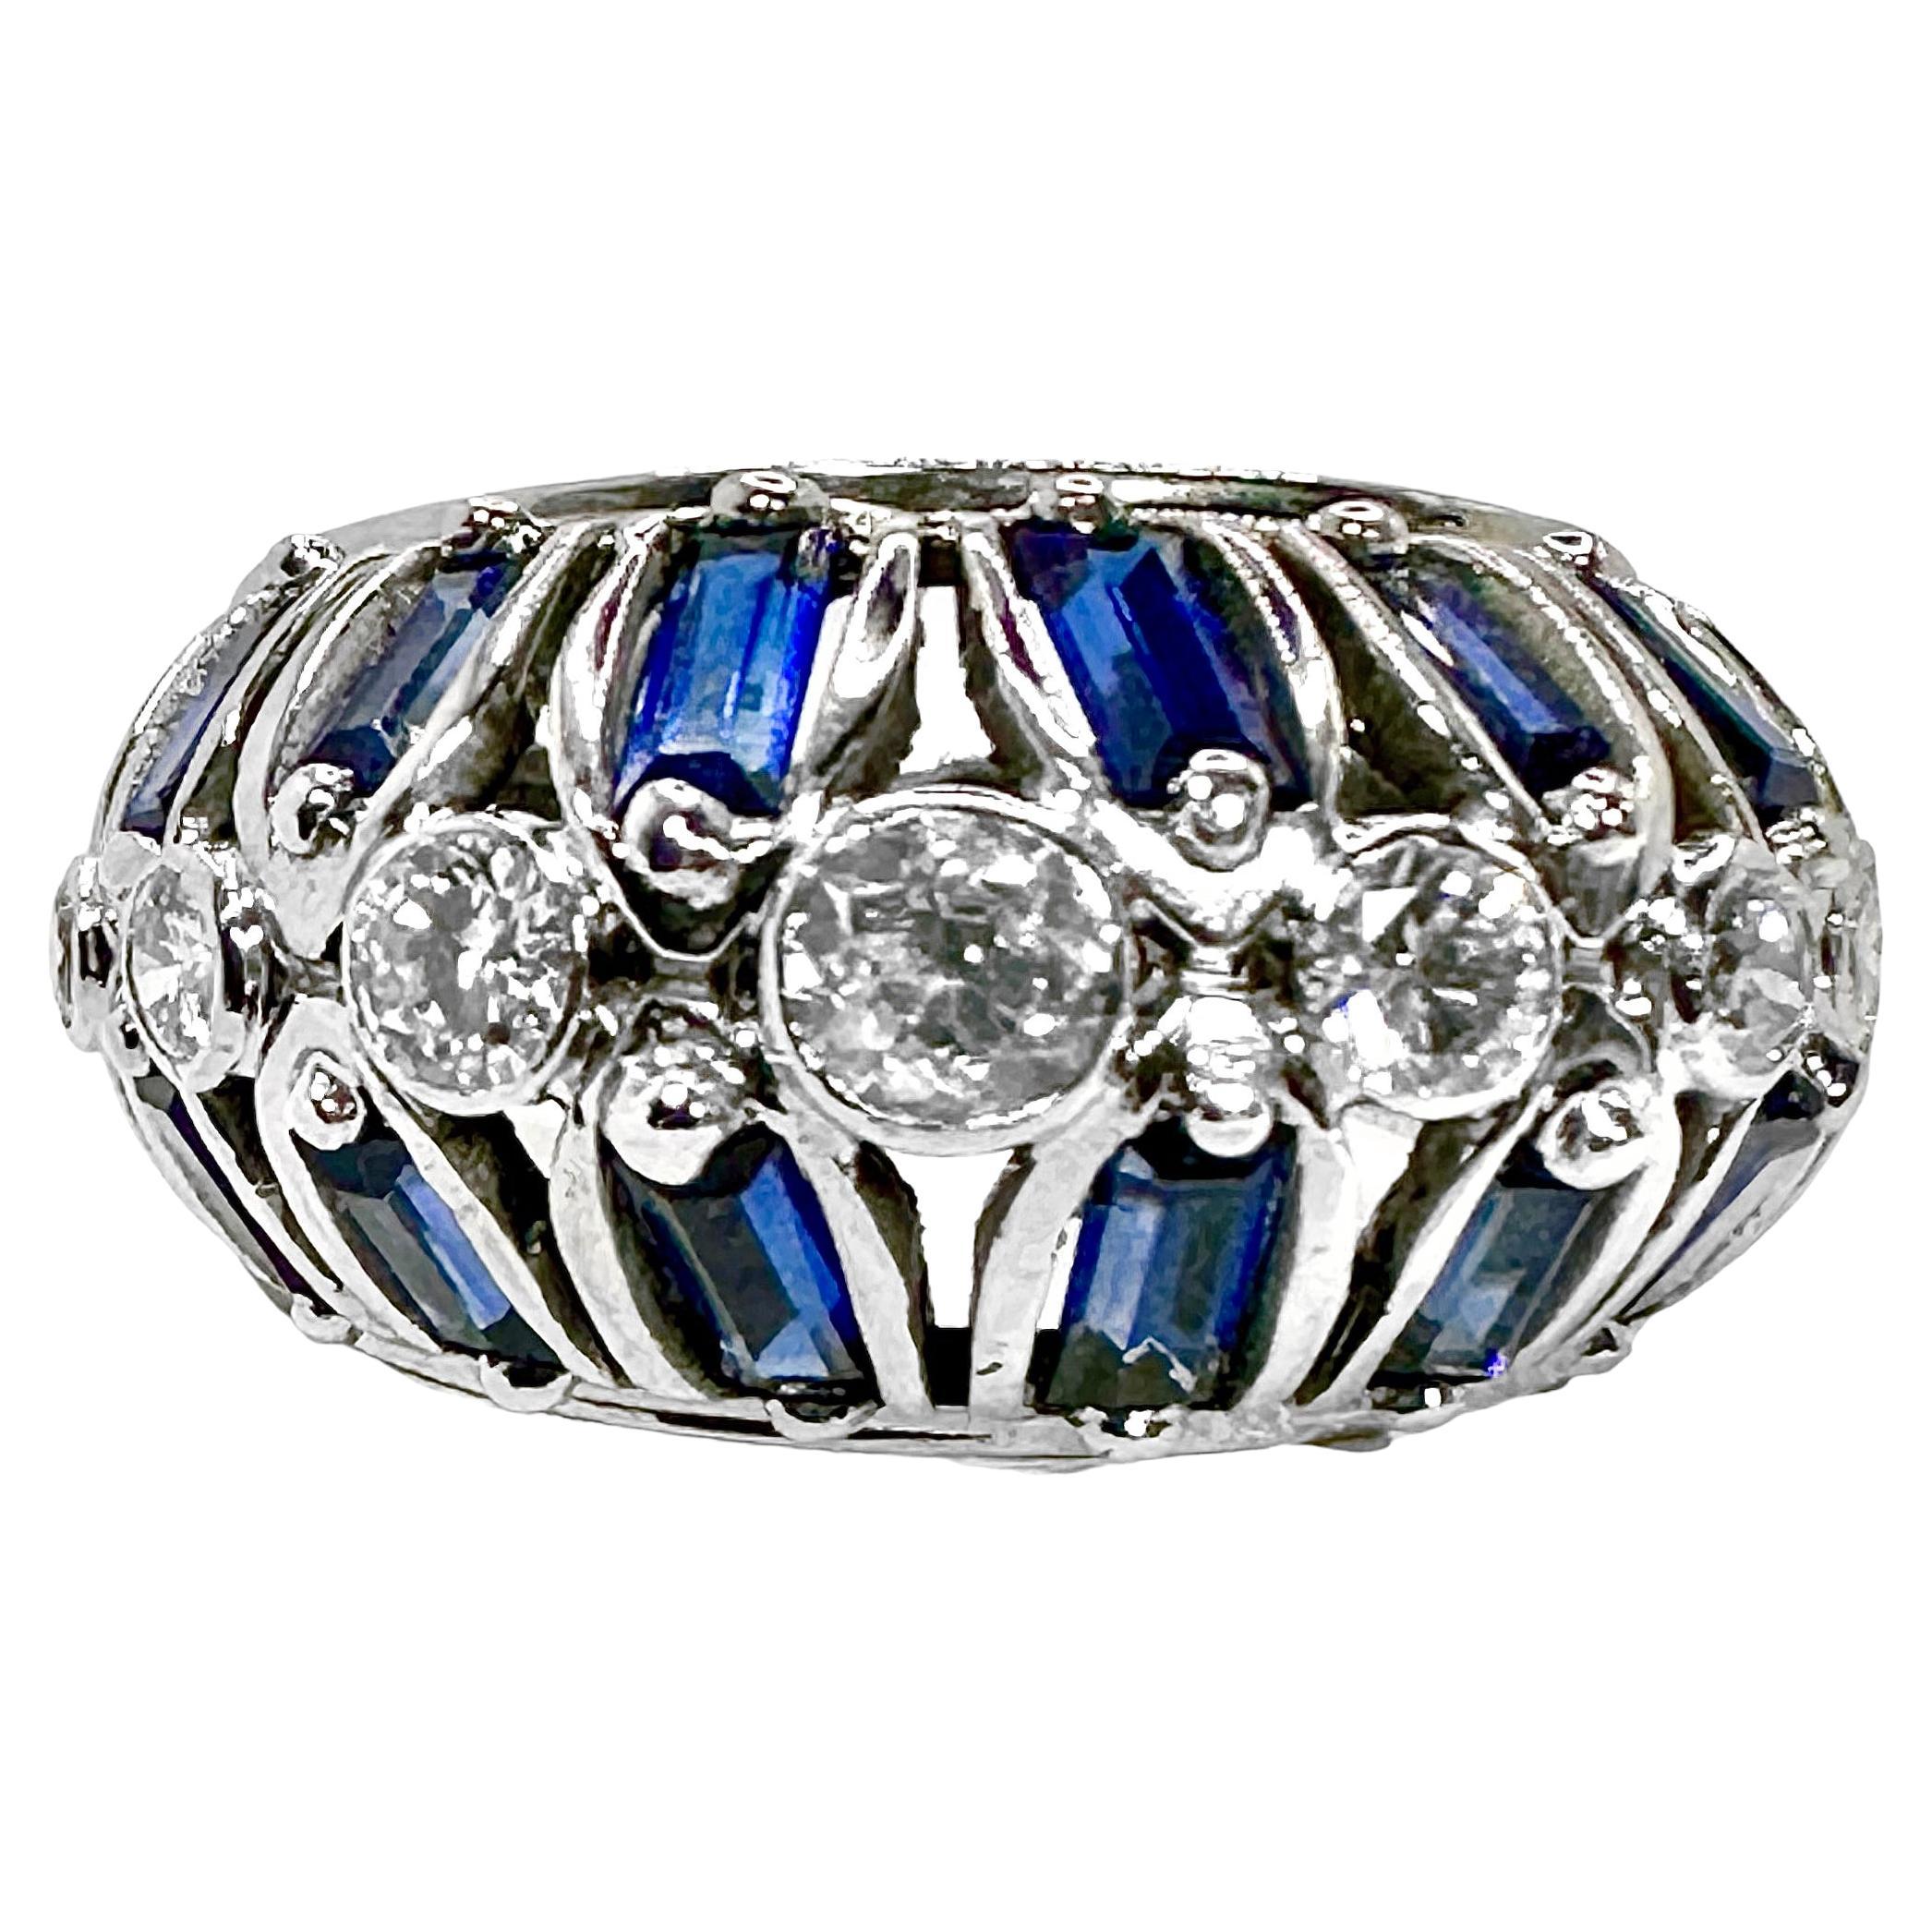 This lovely and uniquely designed handmade platinum Art-Deco bombe dome ring is bezel set with seven European cut and Transitional cut diamonds, having a total approximate weight of .75ct and an overall quality of G/H color and VS1-2 clarity.